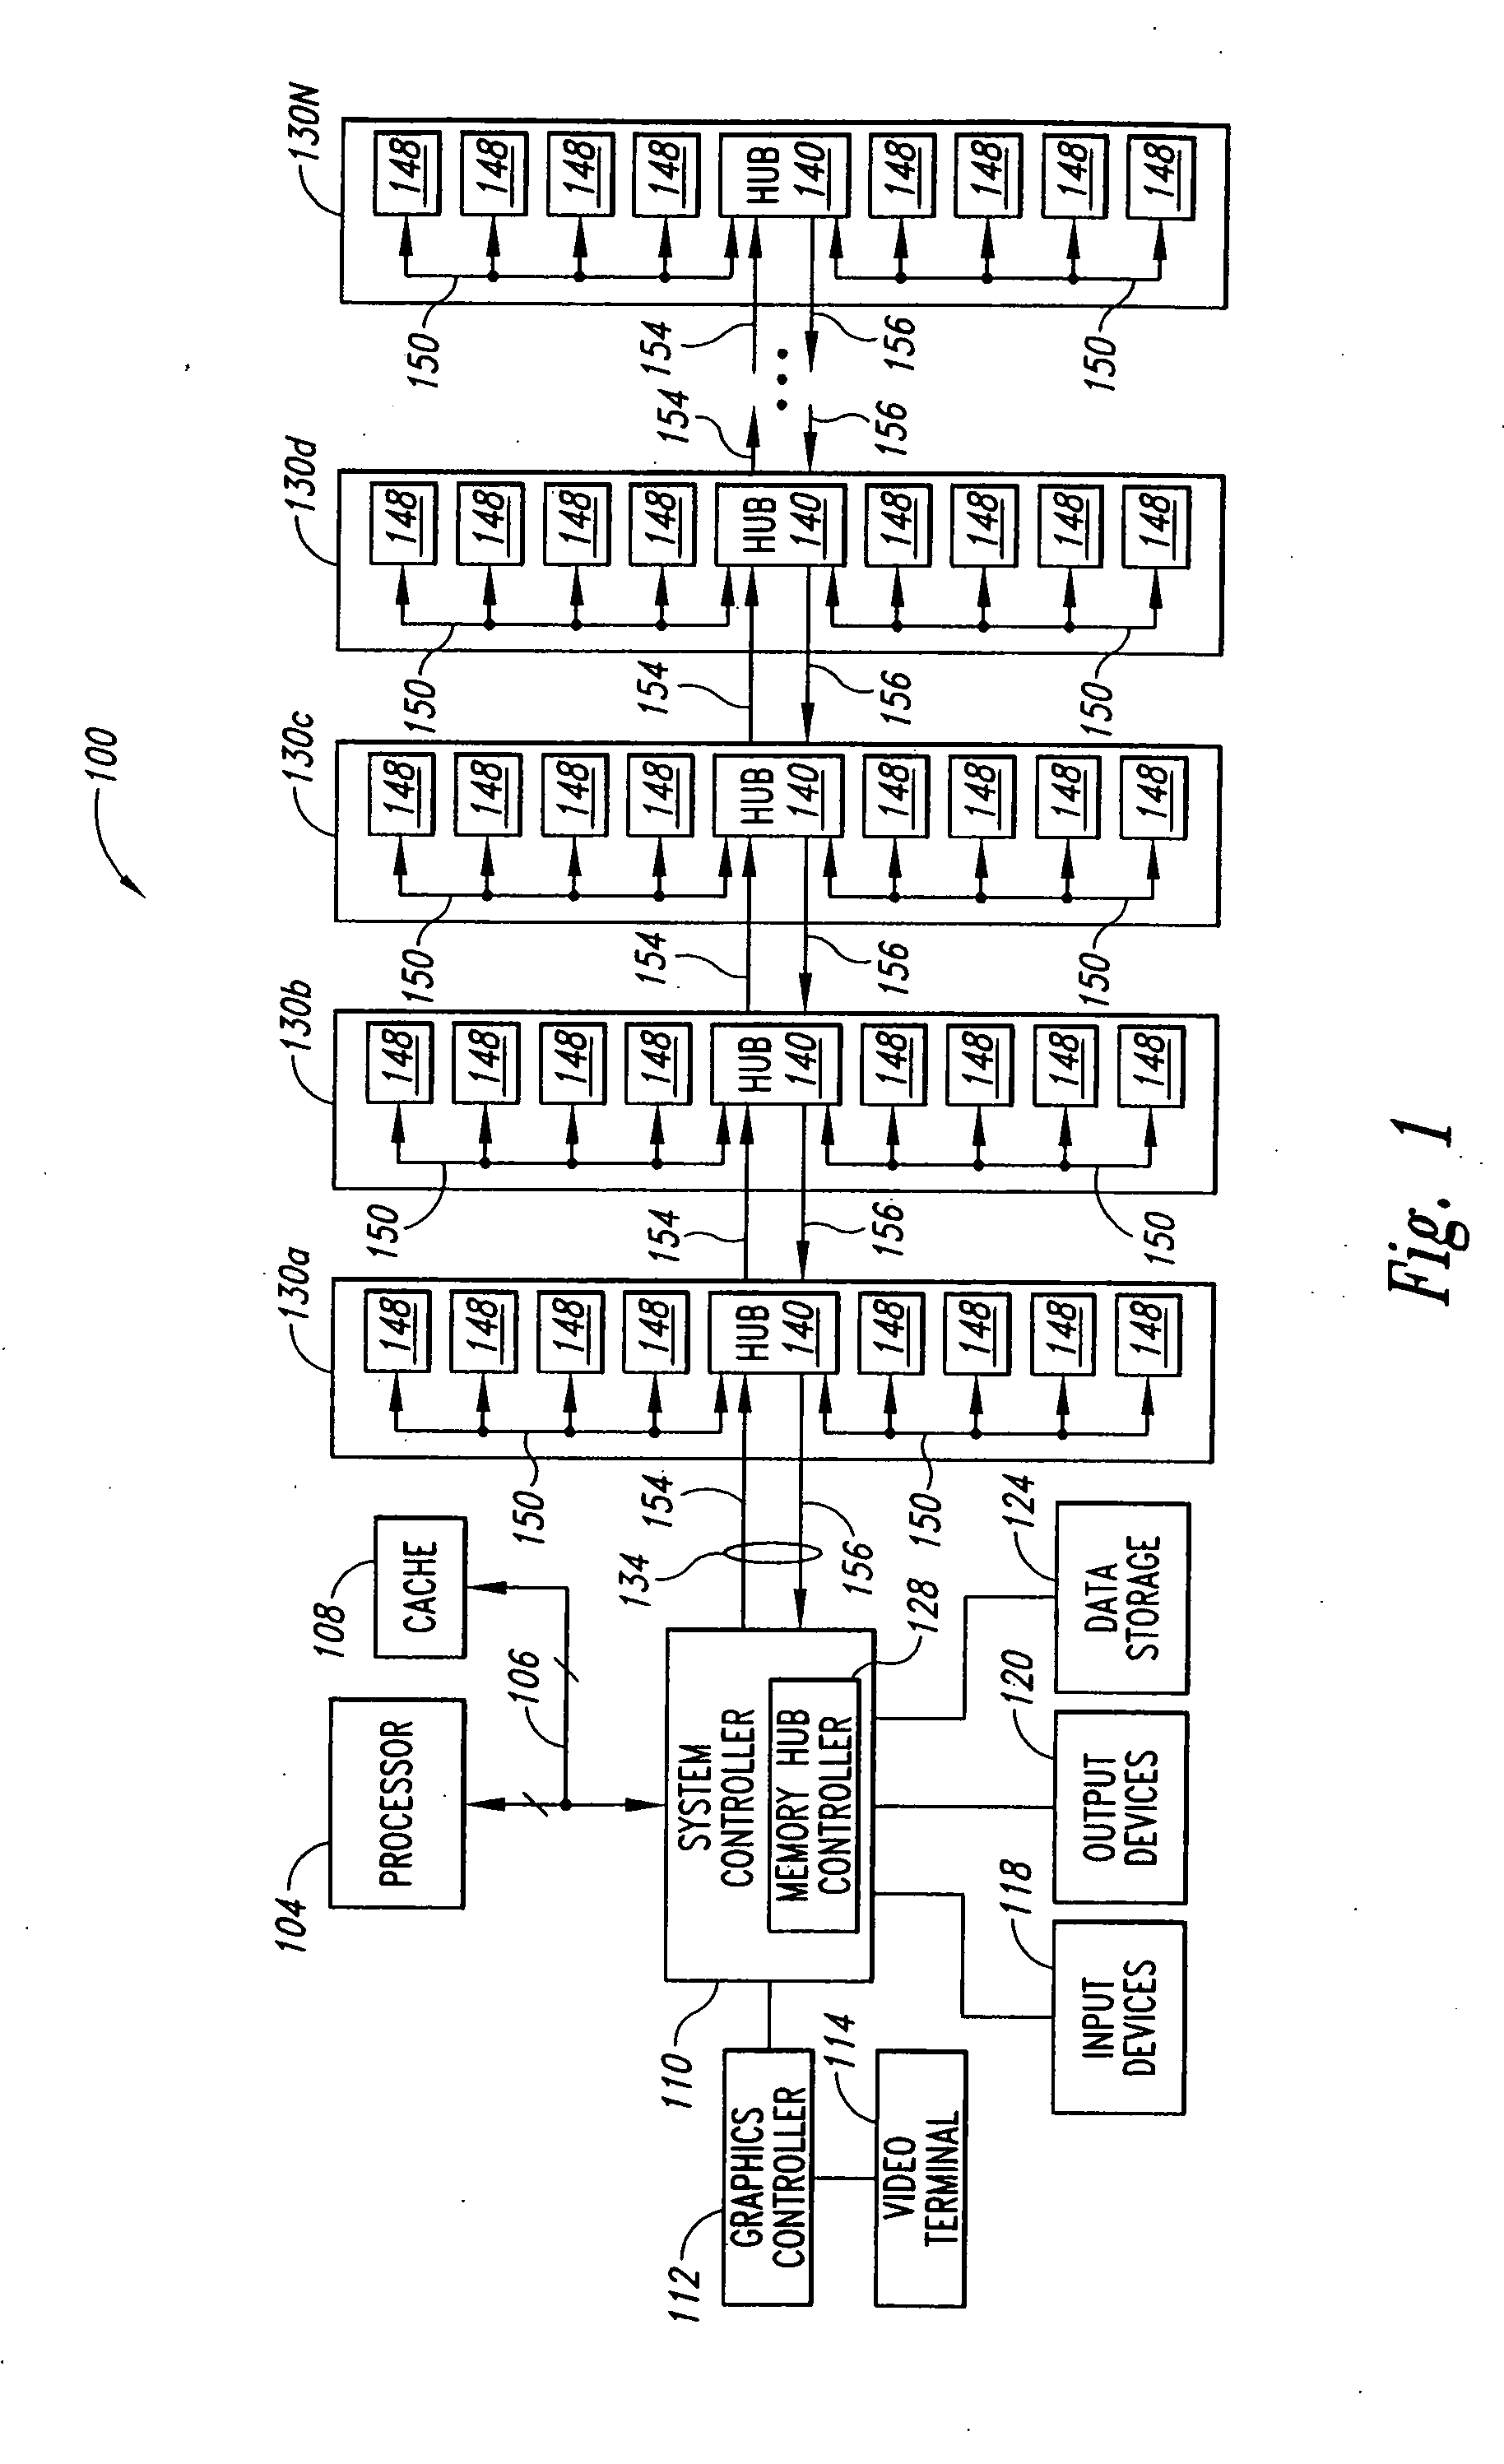 System and method for memory hub-based expansion bus